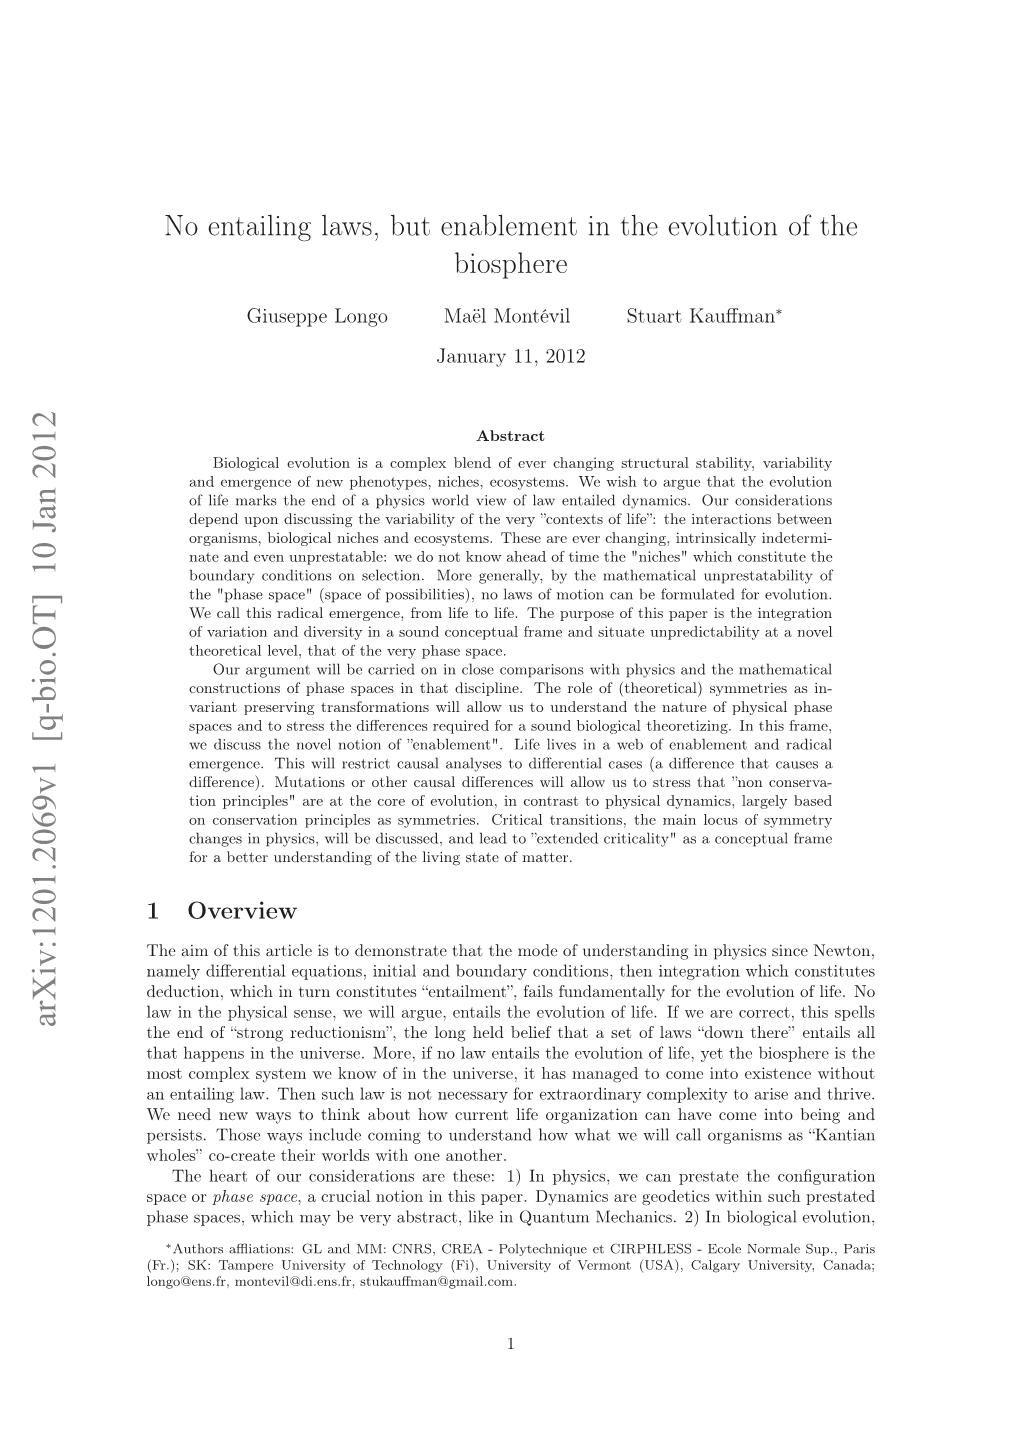 No Entailing Laws but Enablement in the Evolution of the Biosphere'